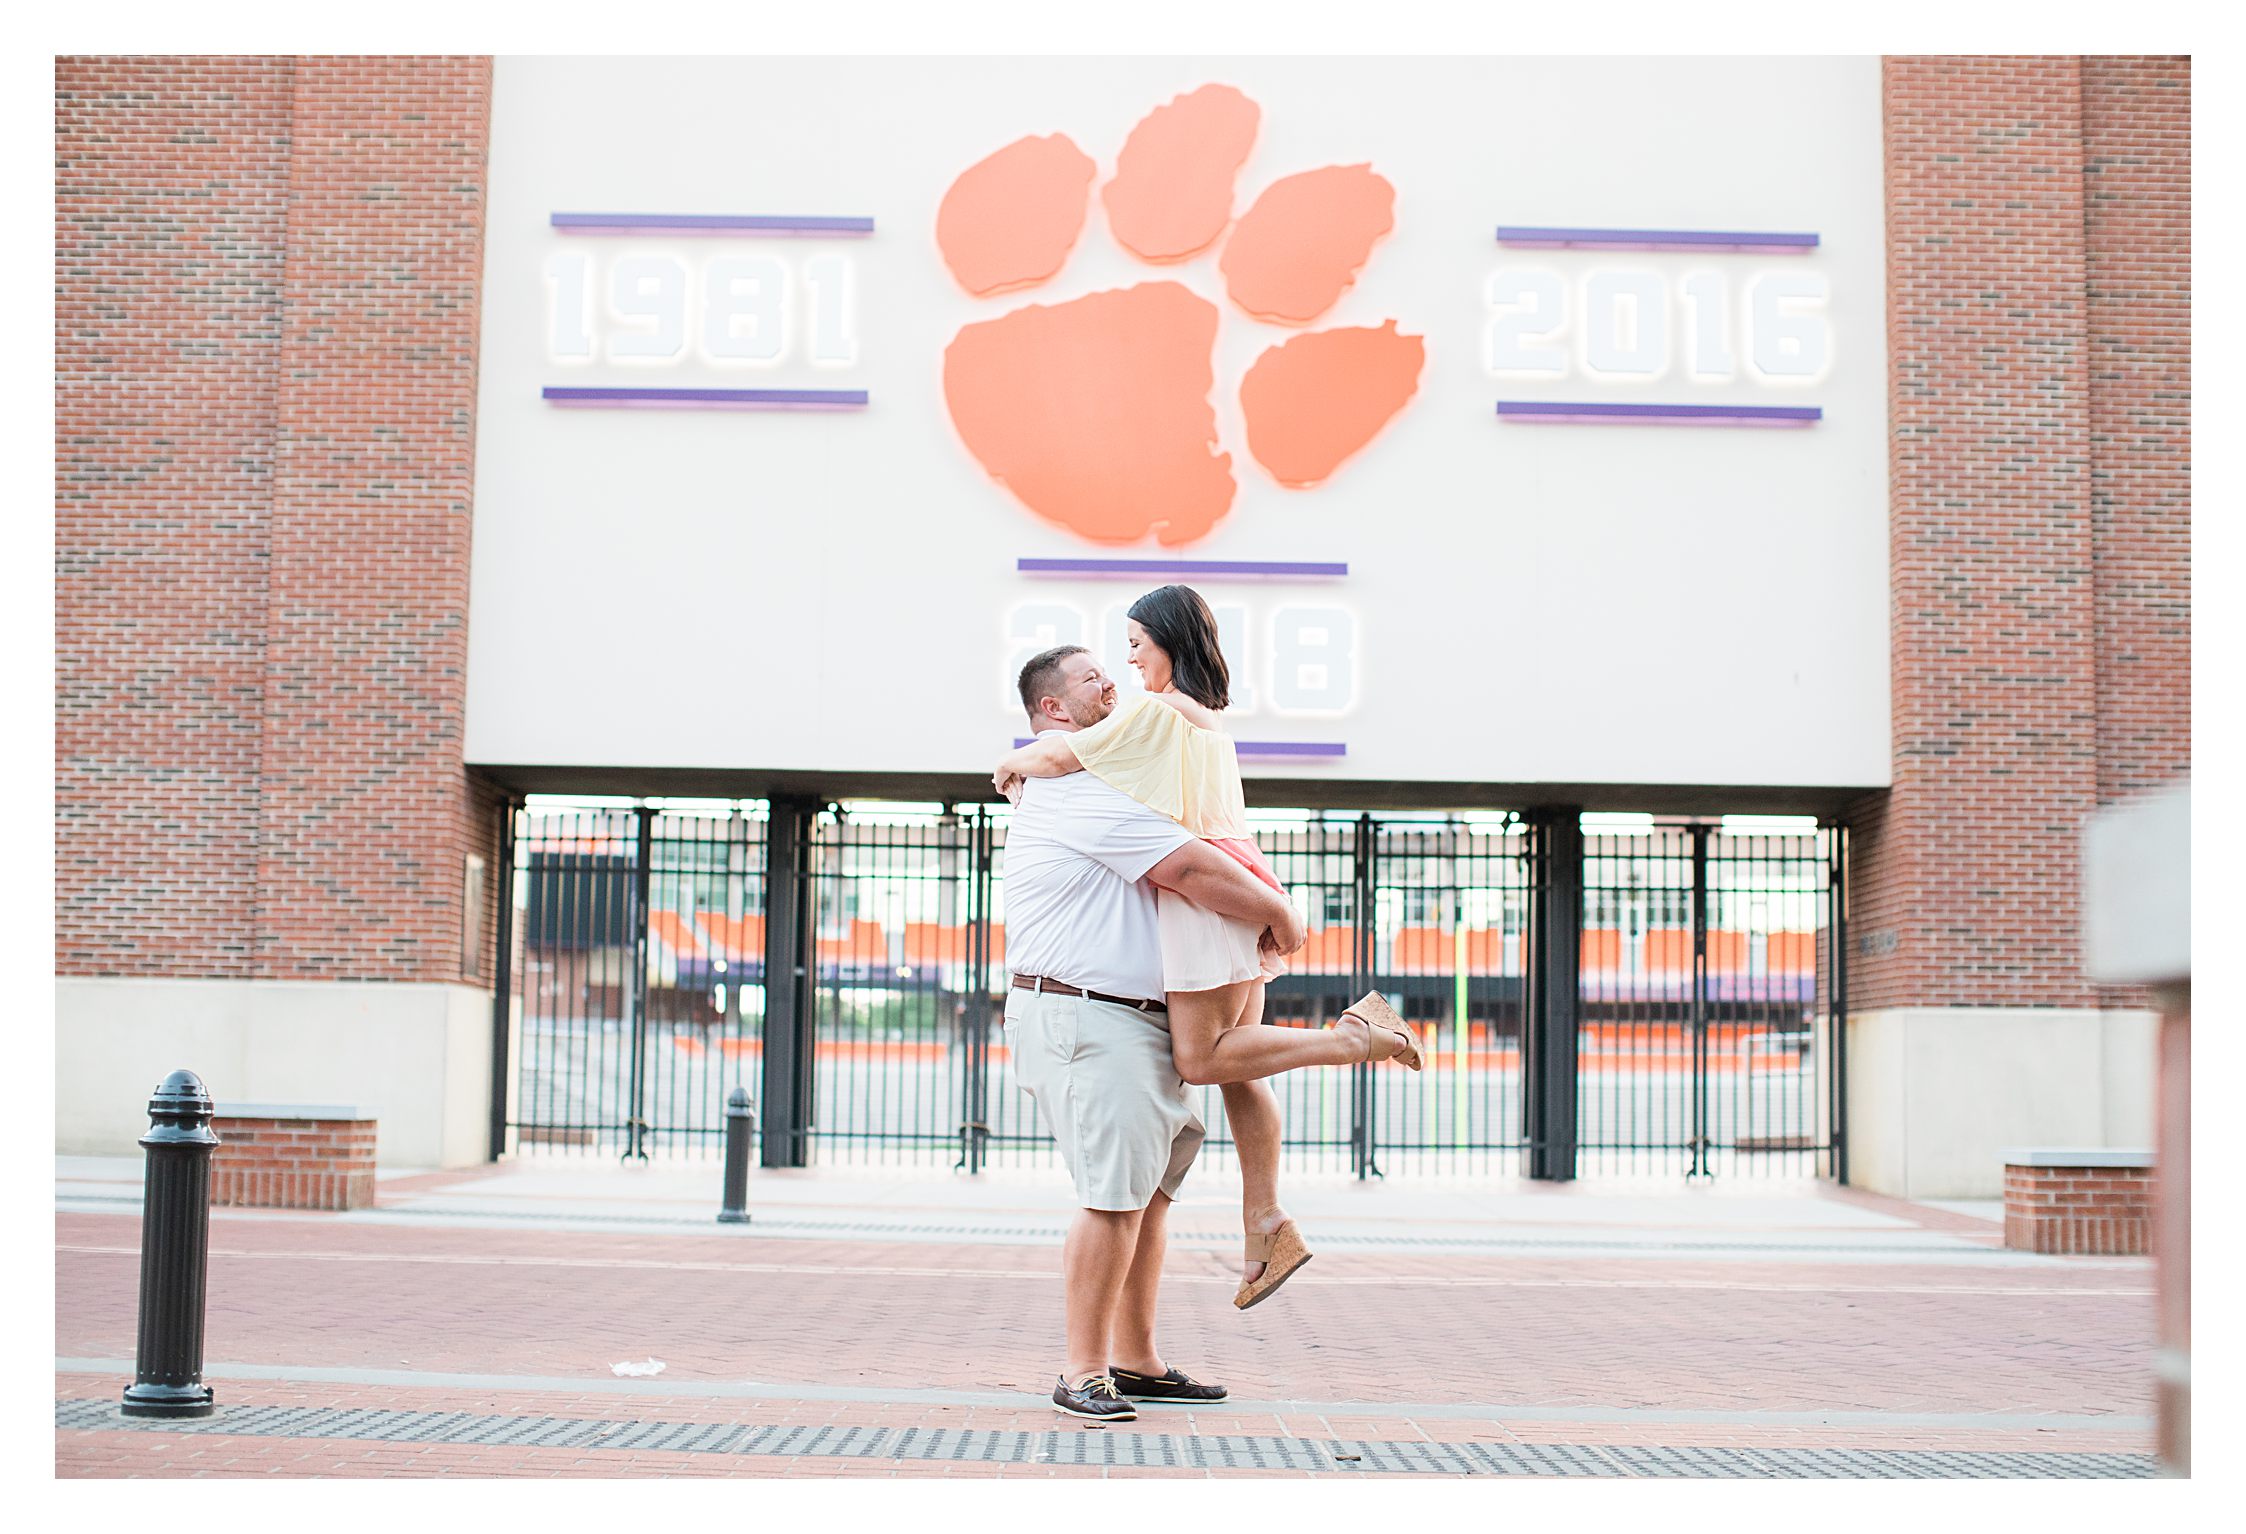 Picking up his future bride of the ground at Clemson